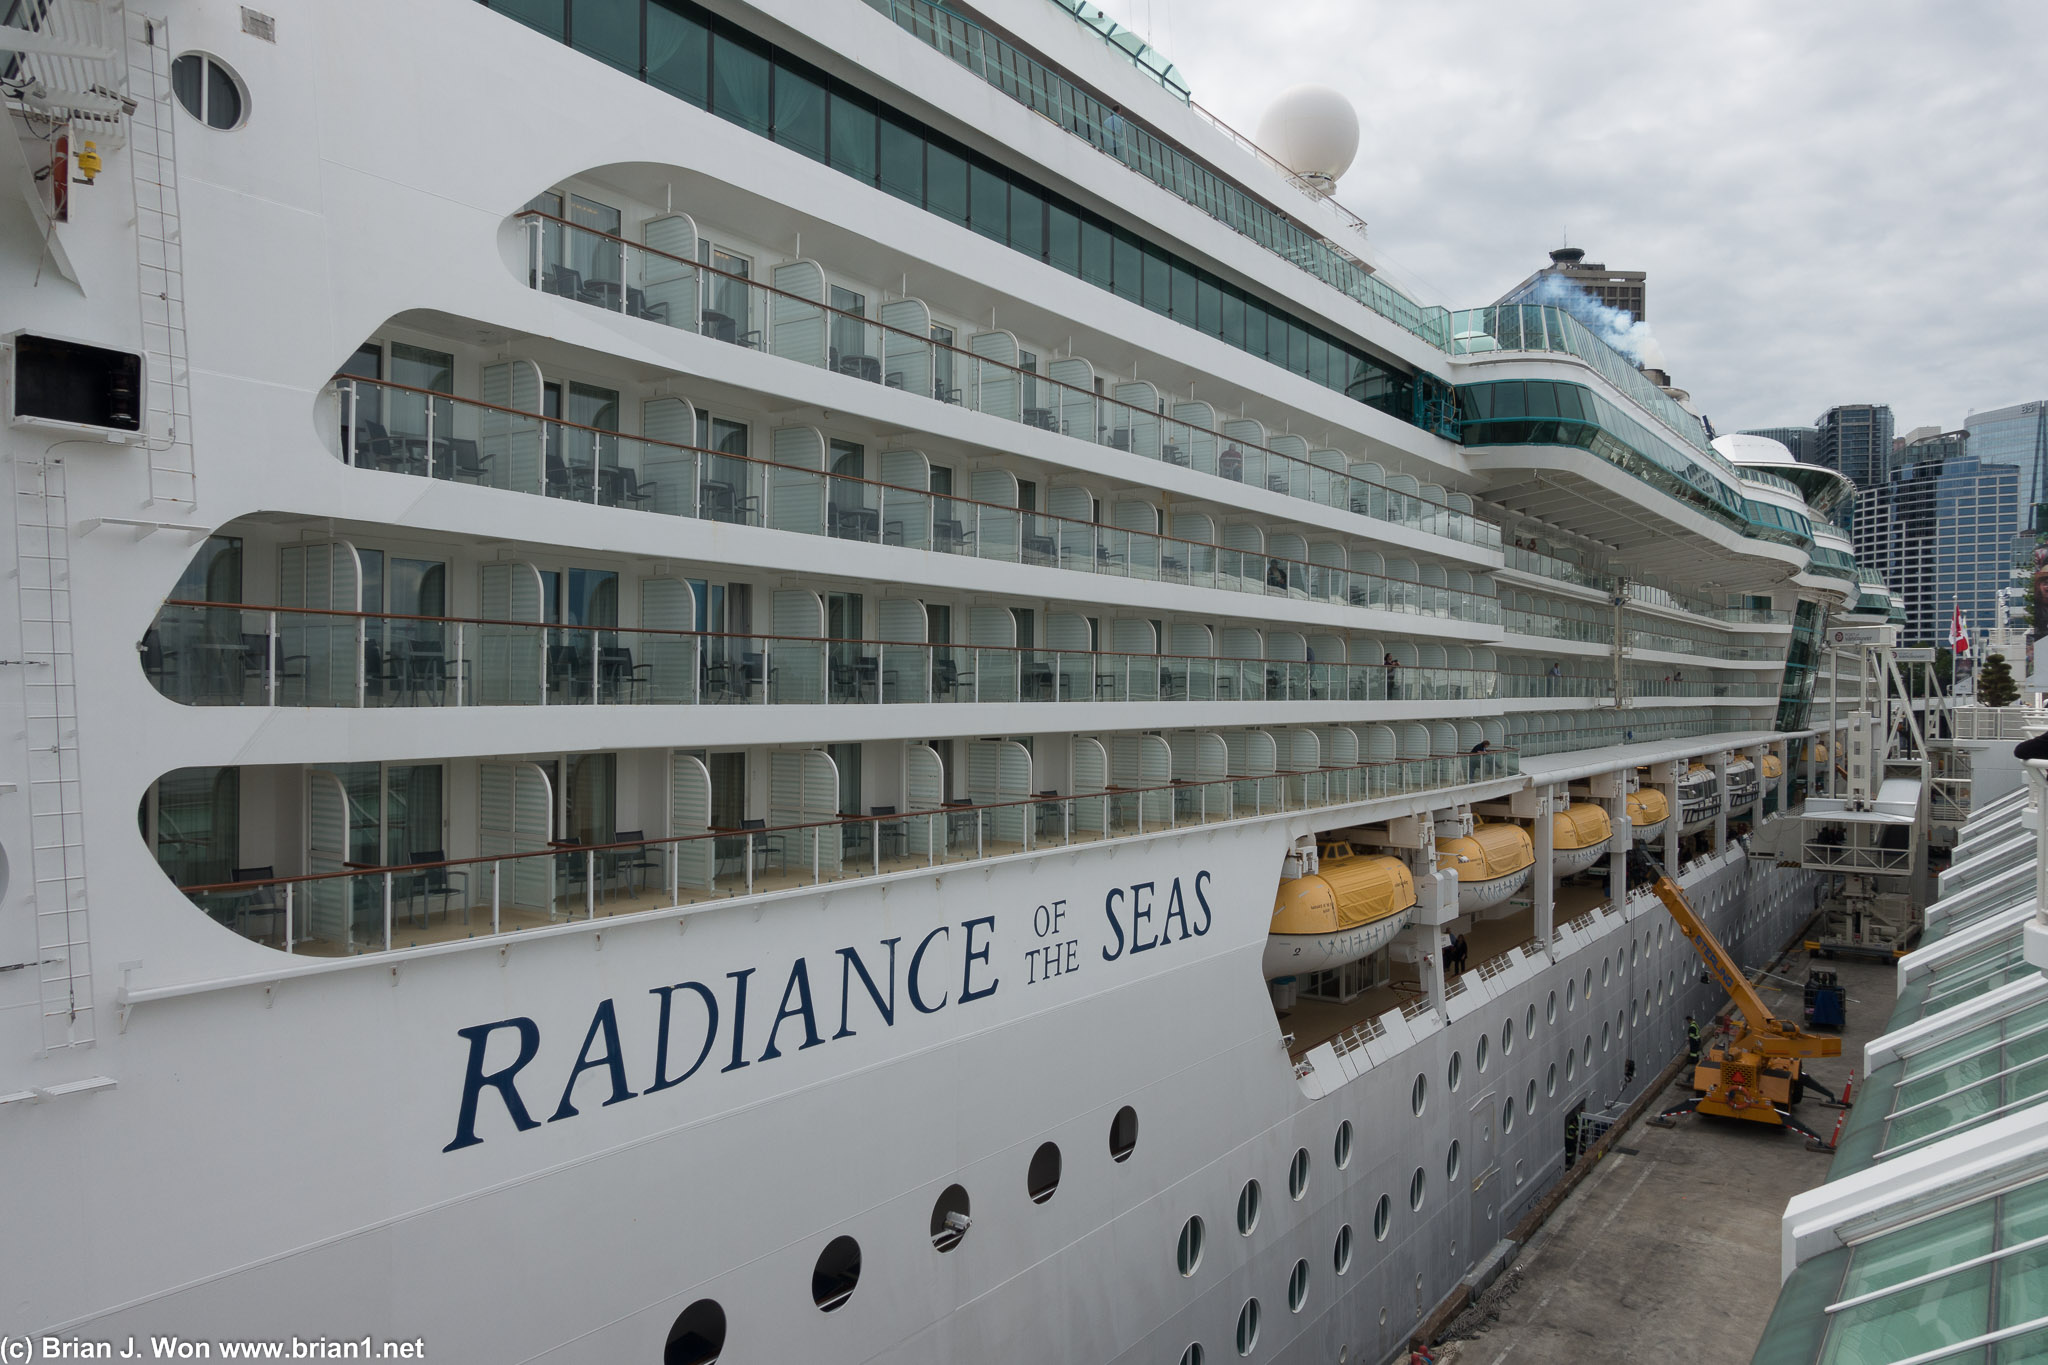 Radiance of the Seas is a medium-sized cruise ship, "only" 90,000 tons.